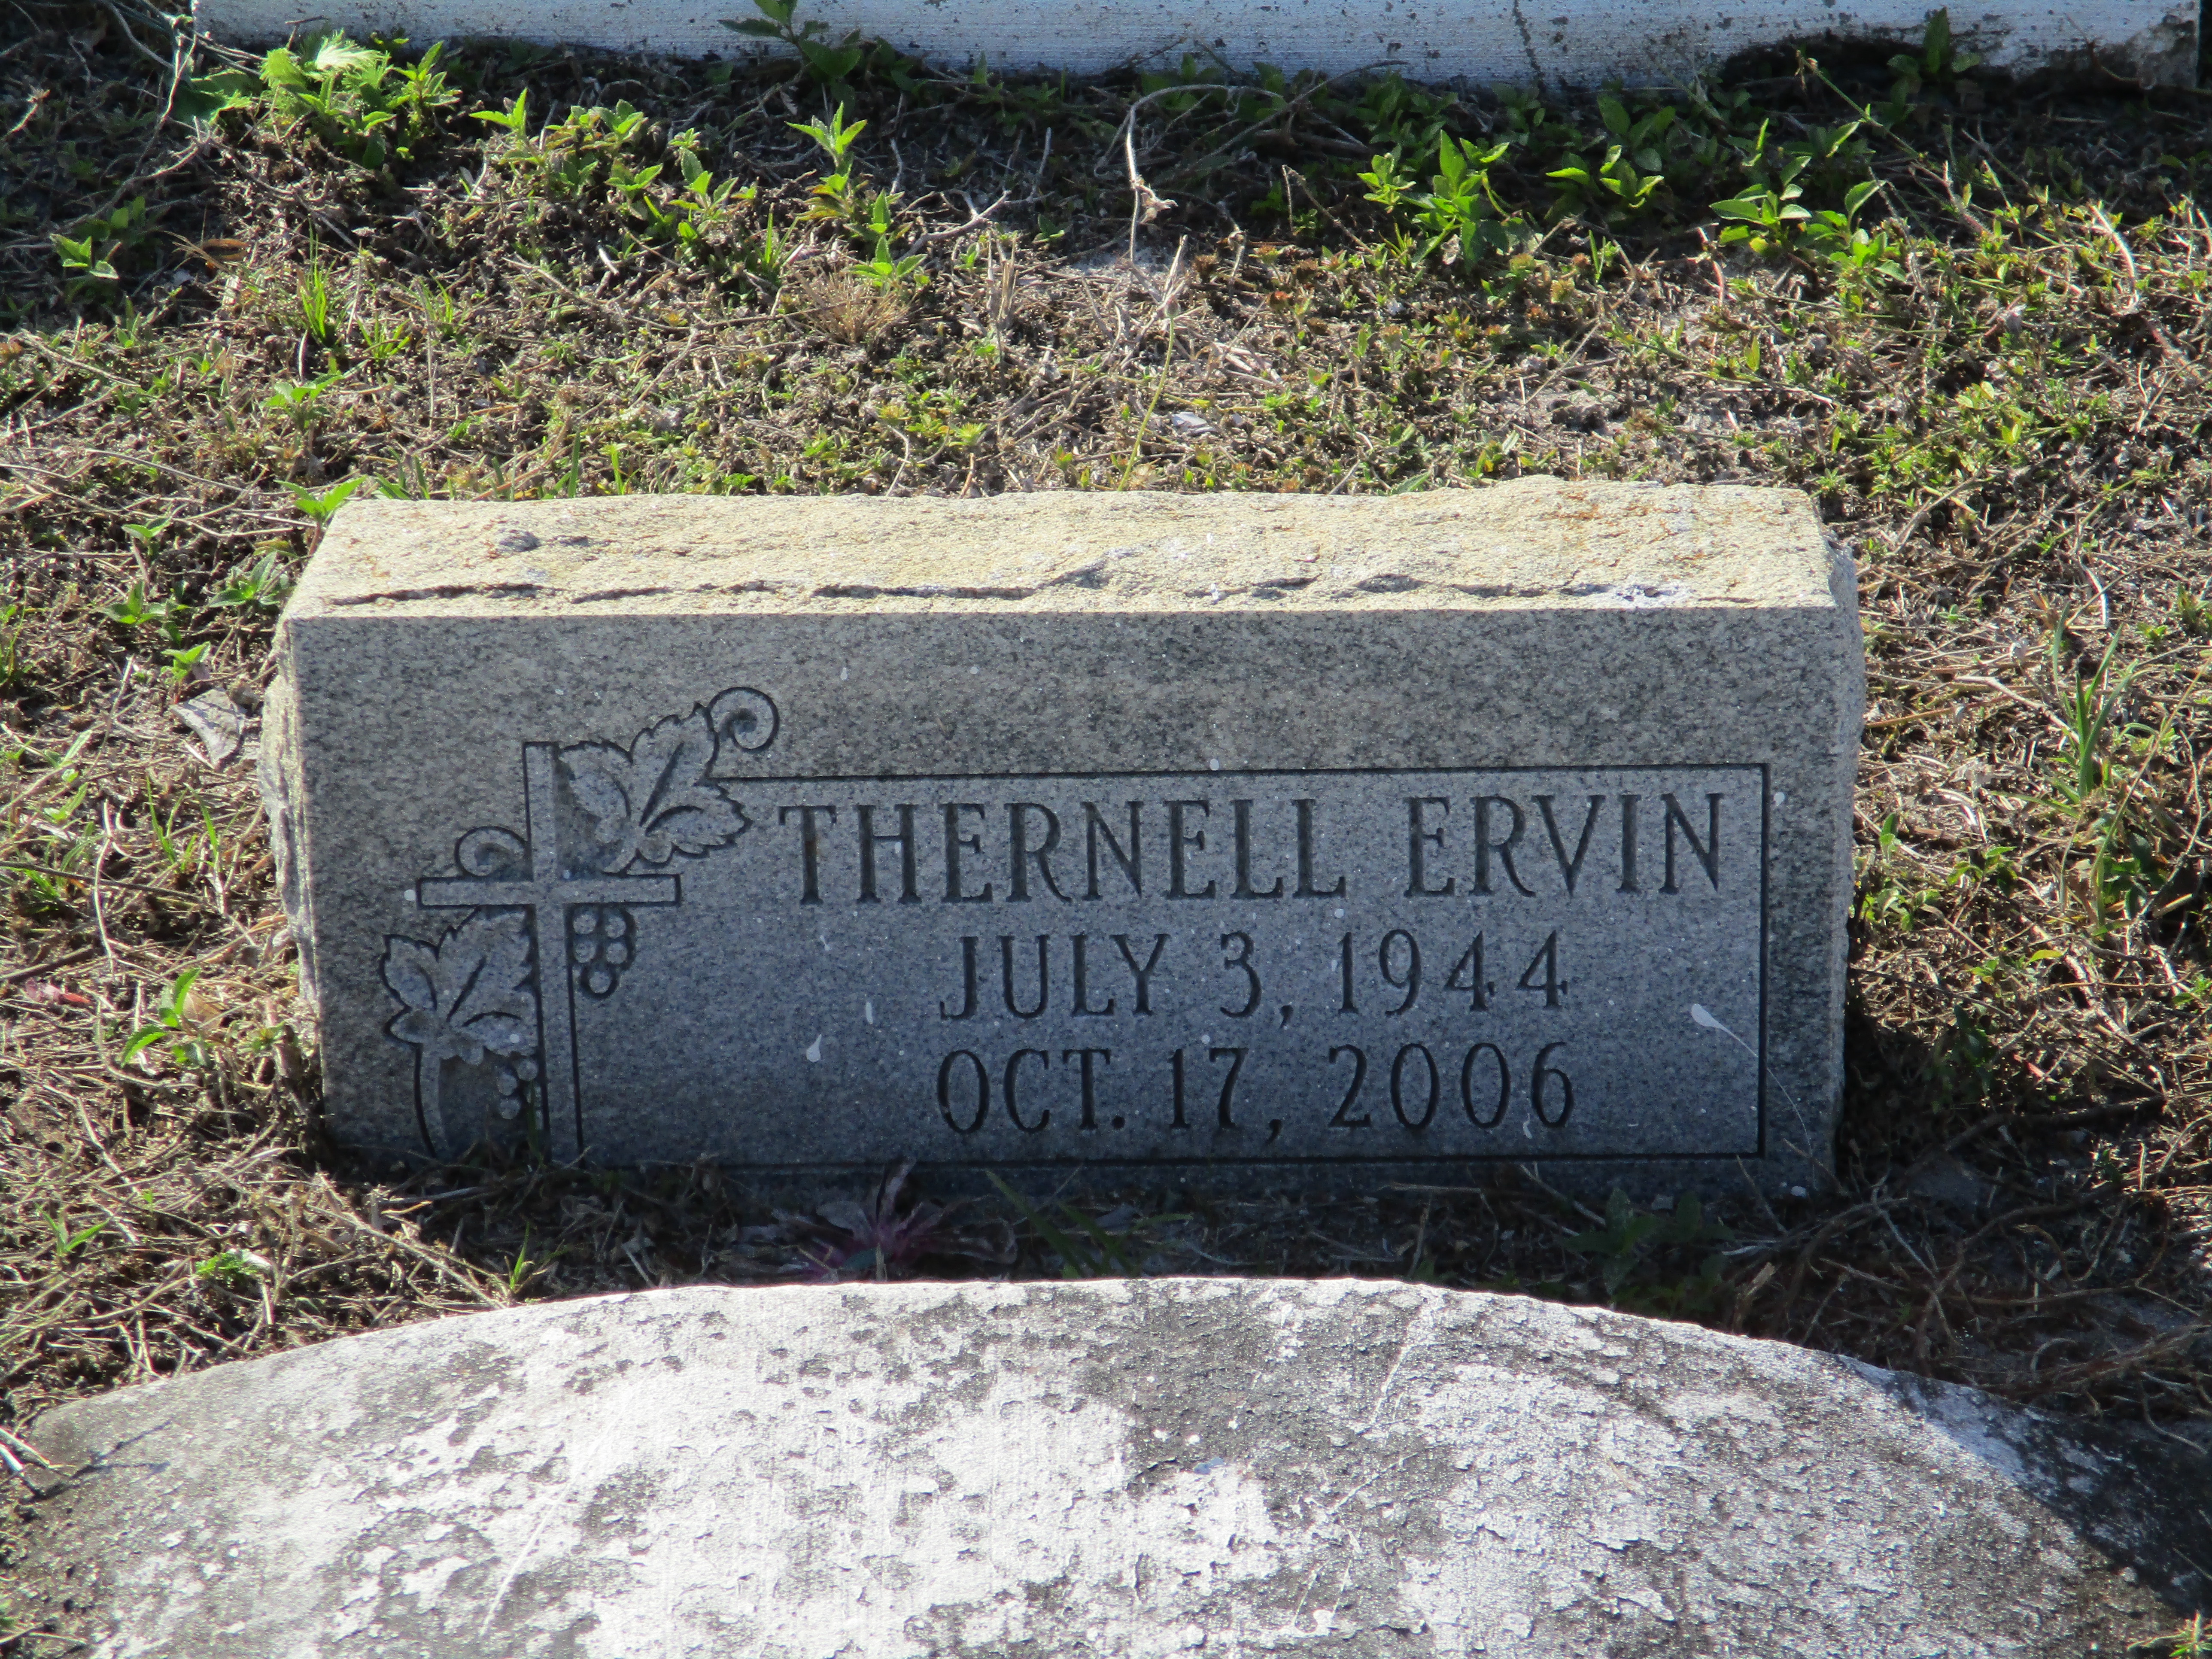 Thernell Ervin